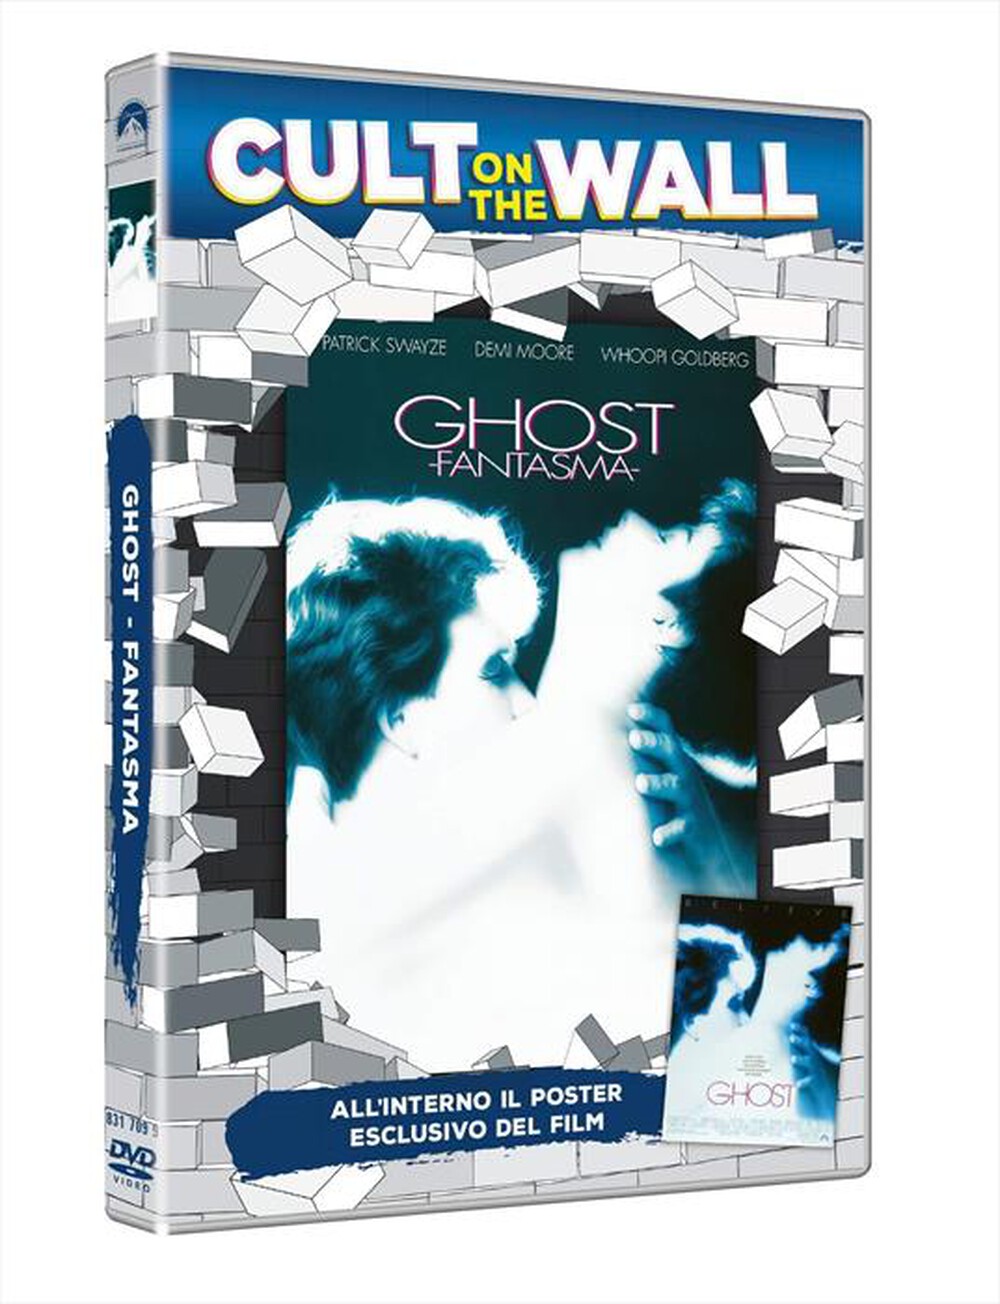 "Paramount Pictures - Ghost - Fantasma (Cult On The Wall) (Dvd+Poster)"